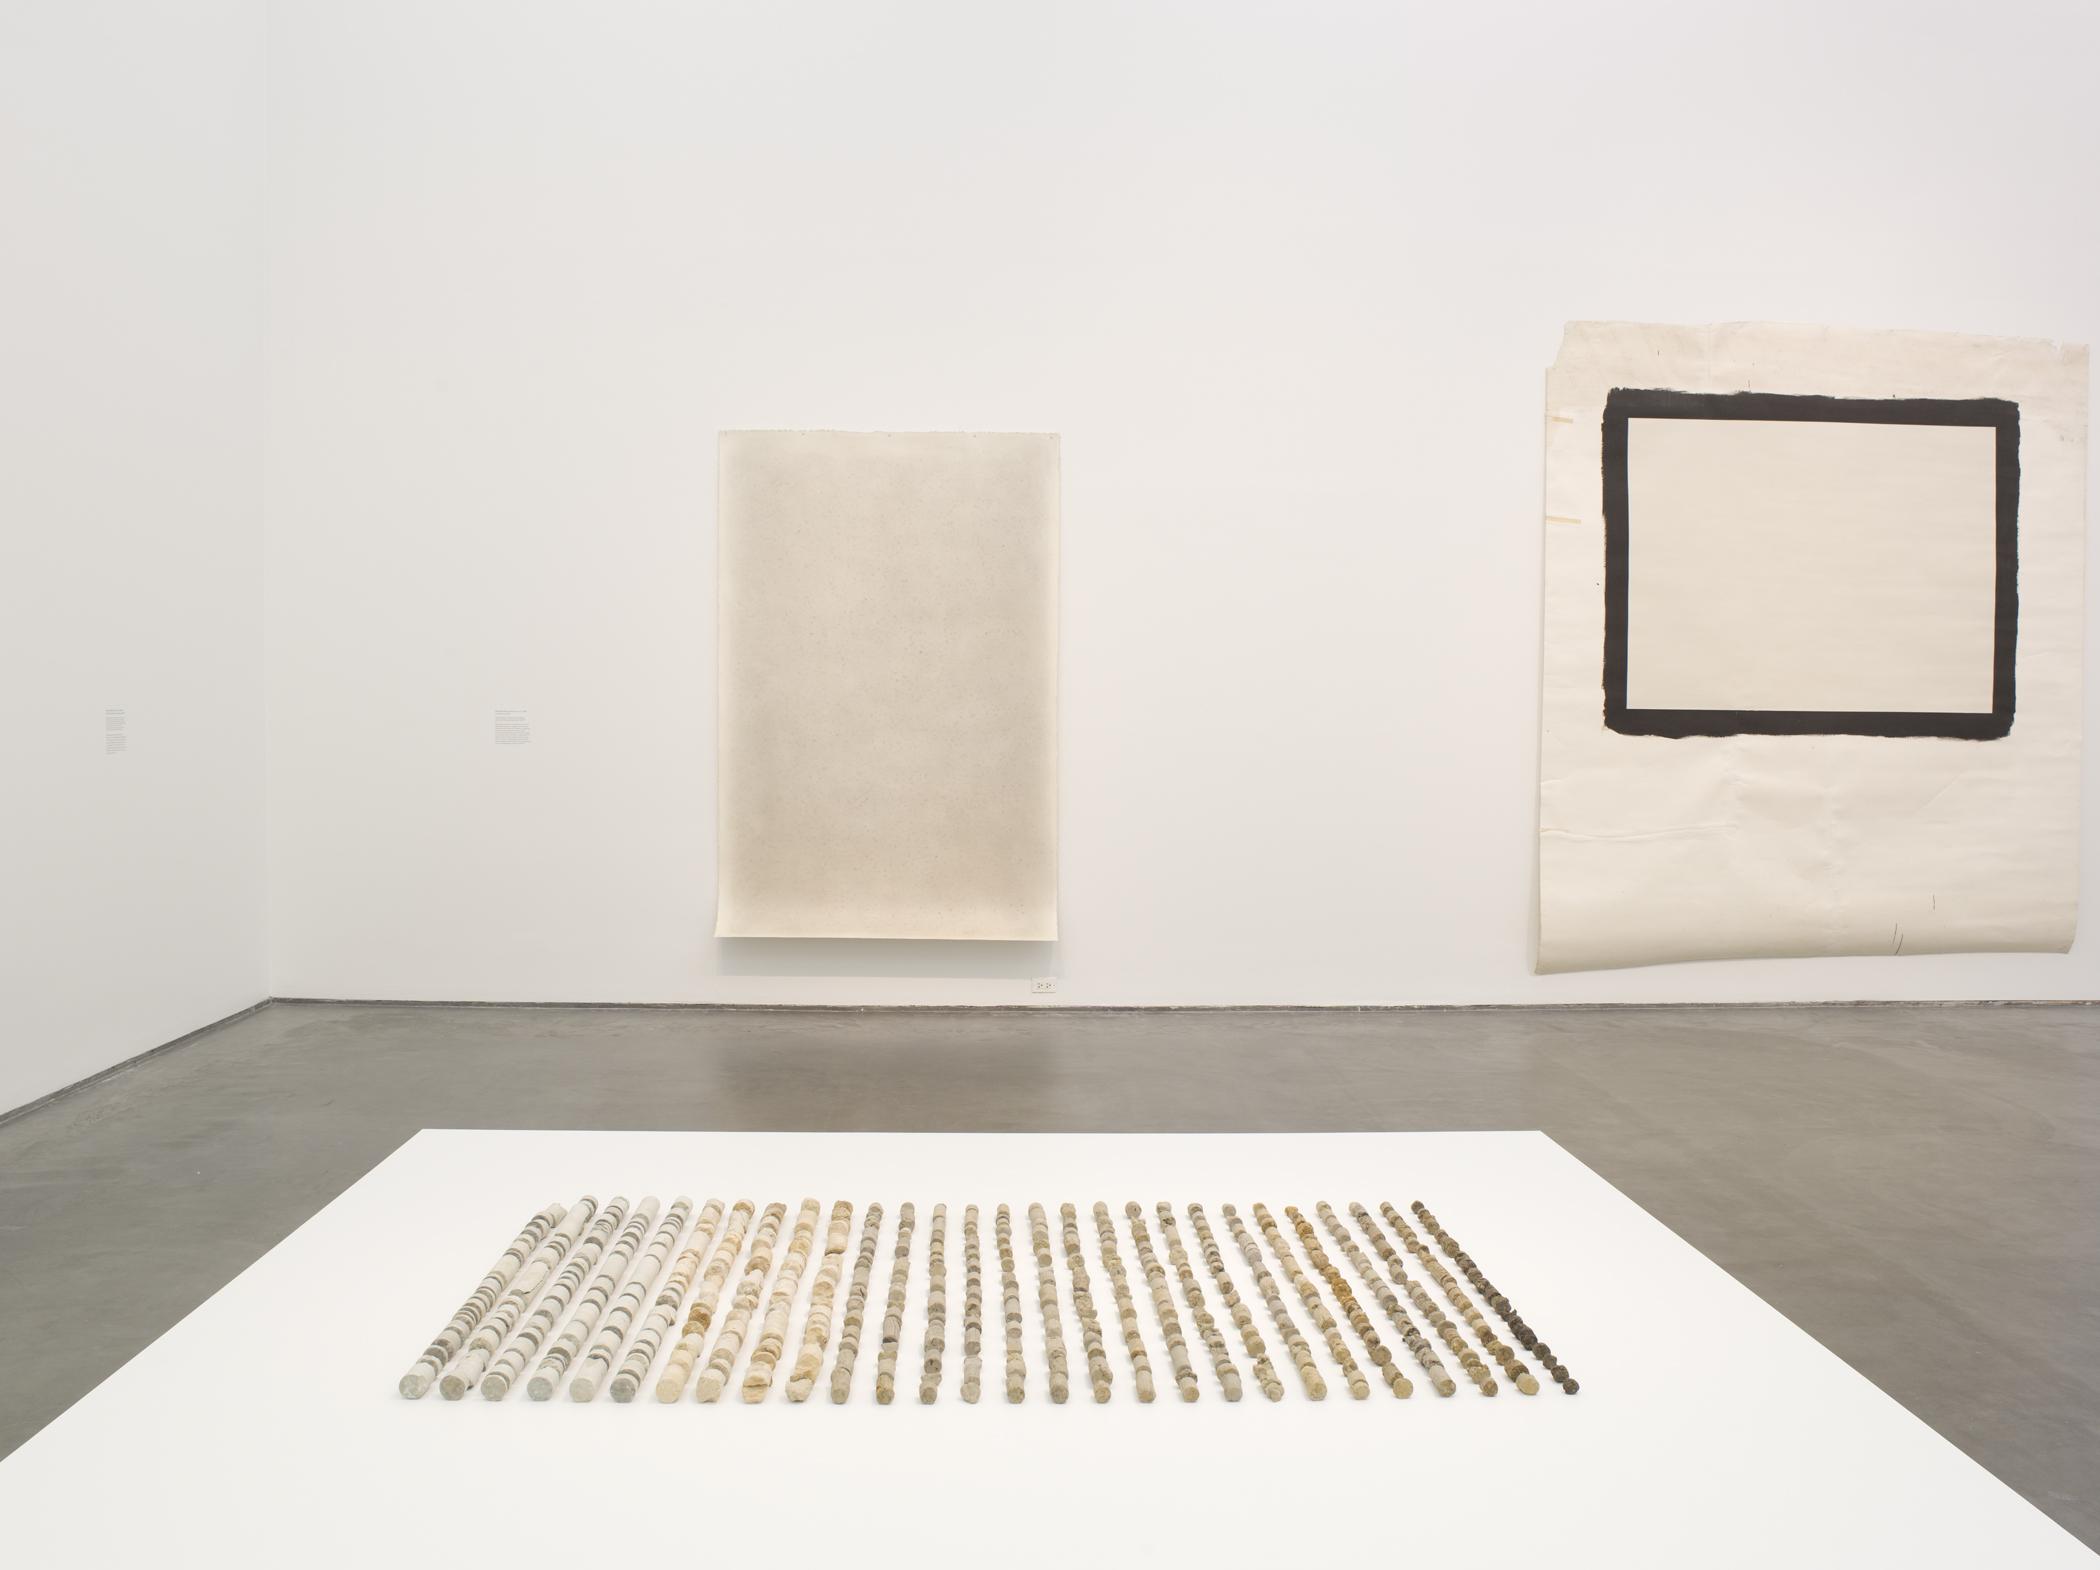 Installation view of two paintings and a sculpture composed of rock fragments arranged in rows and organized by color on a white platform